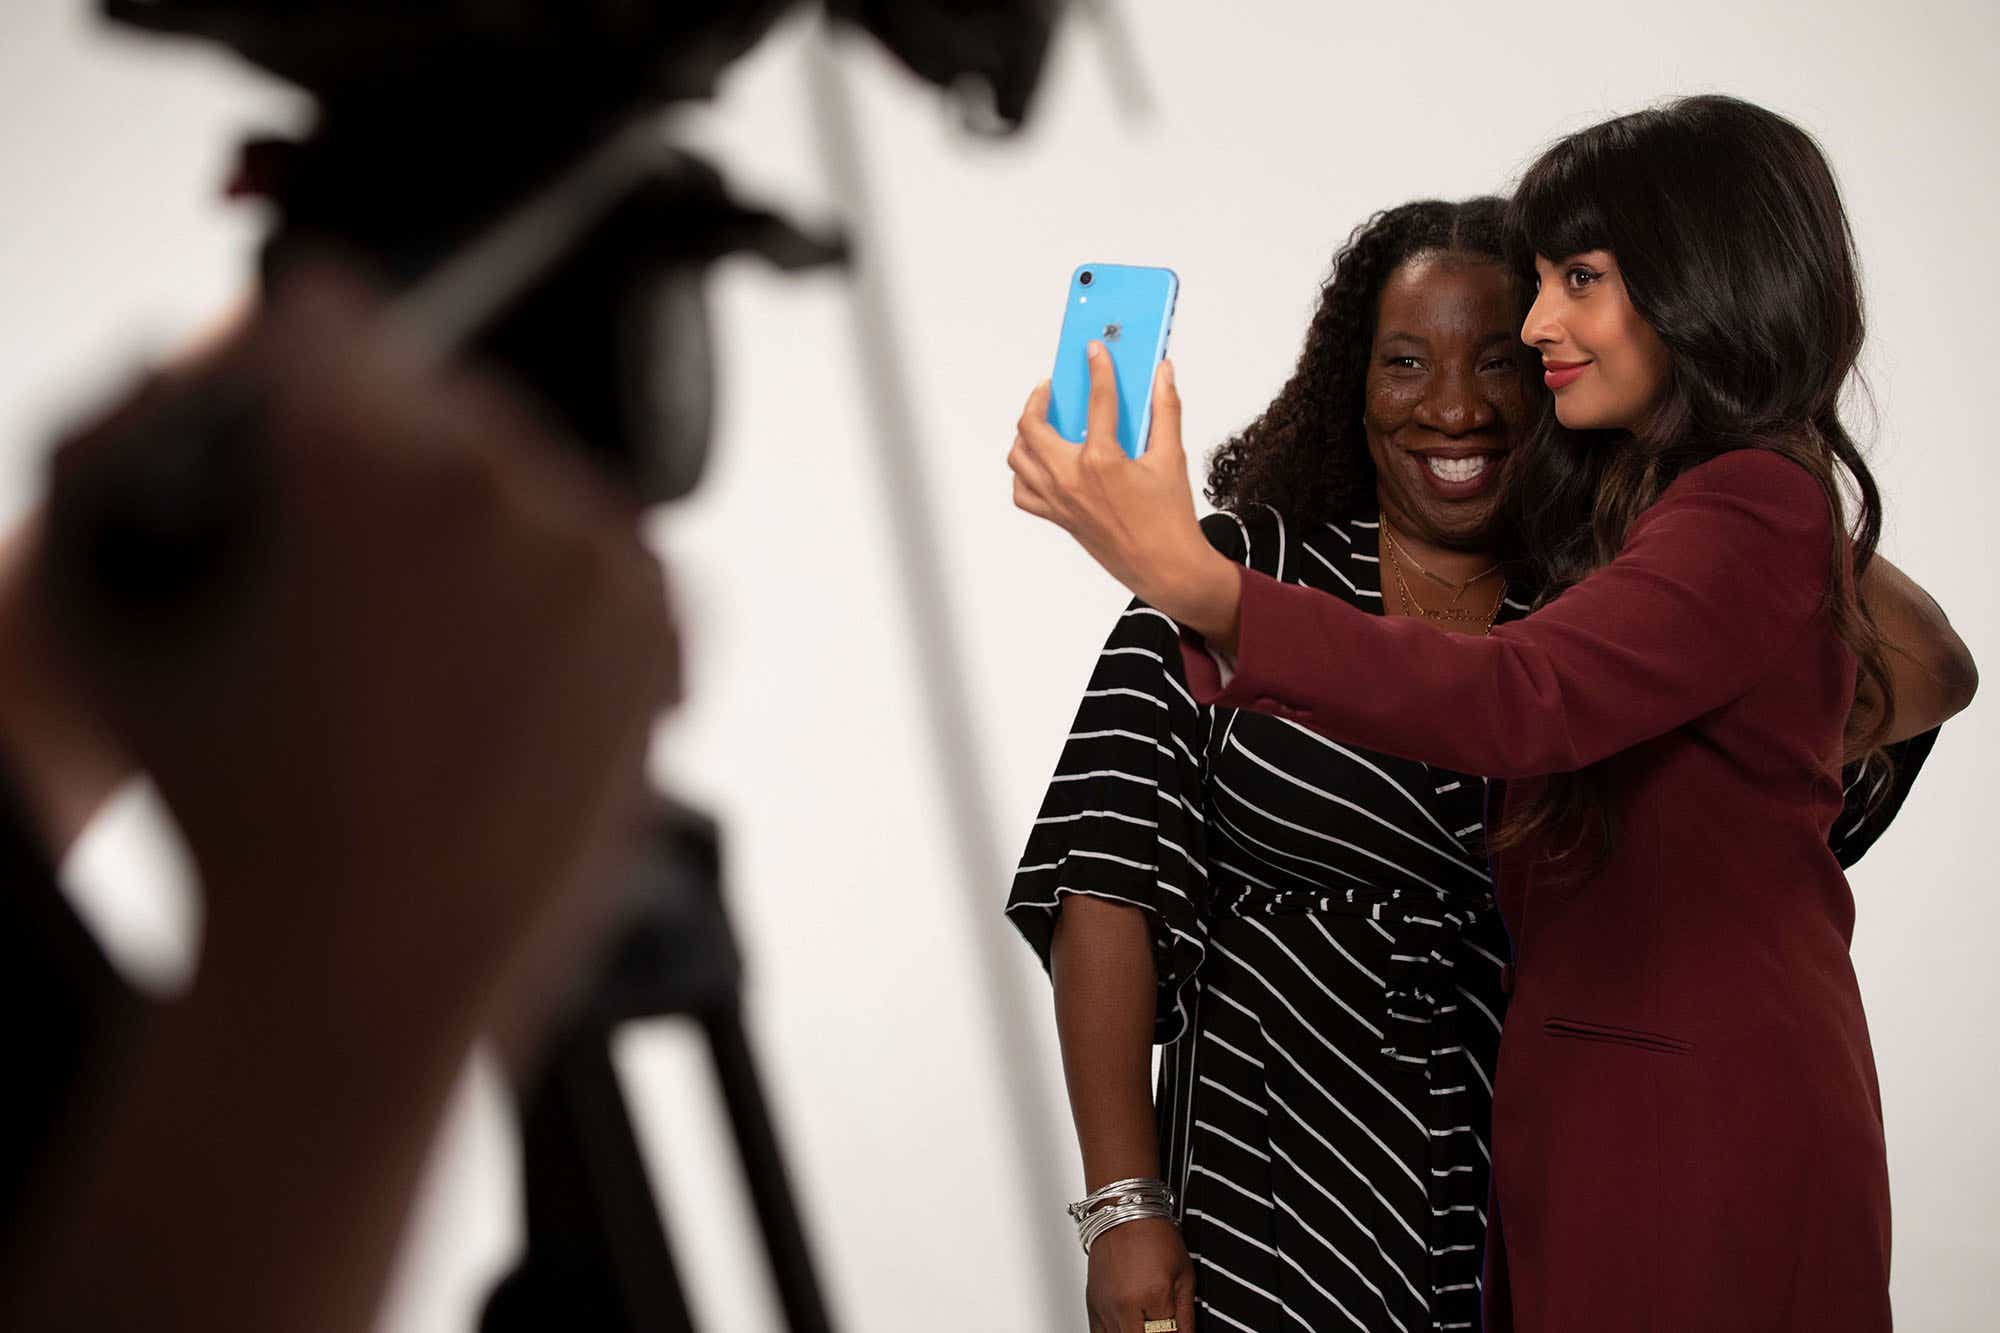 #MeToo Founder Tarana Burke and actor Jameela Jamil appeared in KCM's Thank You Notes series, produced in partnership with Olay.